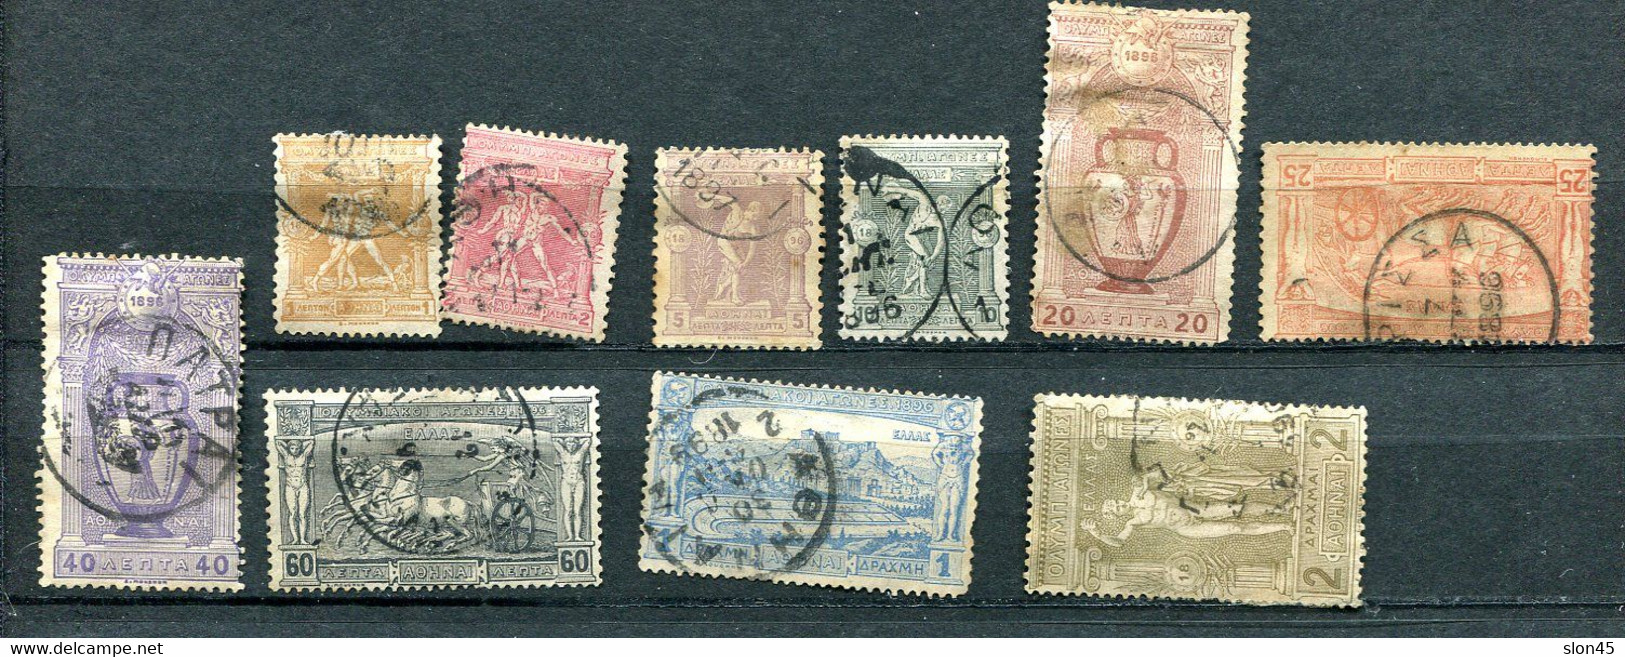 Greece 1896 First Olympic Games Used Up To 2dr Sc 117-126 12019 - Usati